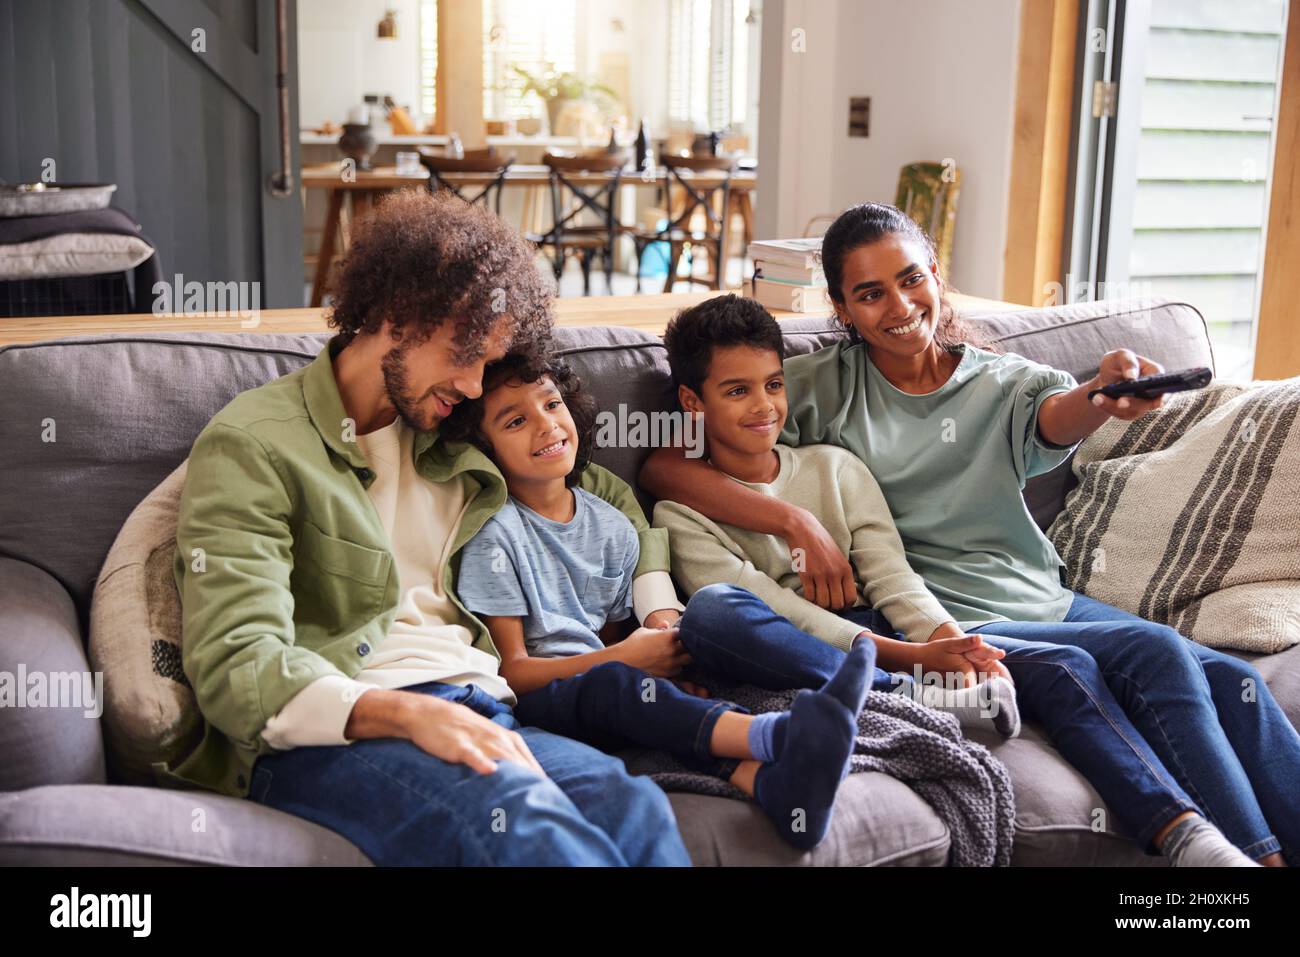 Family watching TV at home on sofa Stock Photo